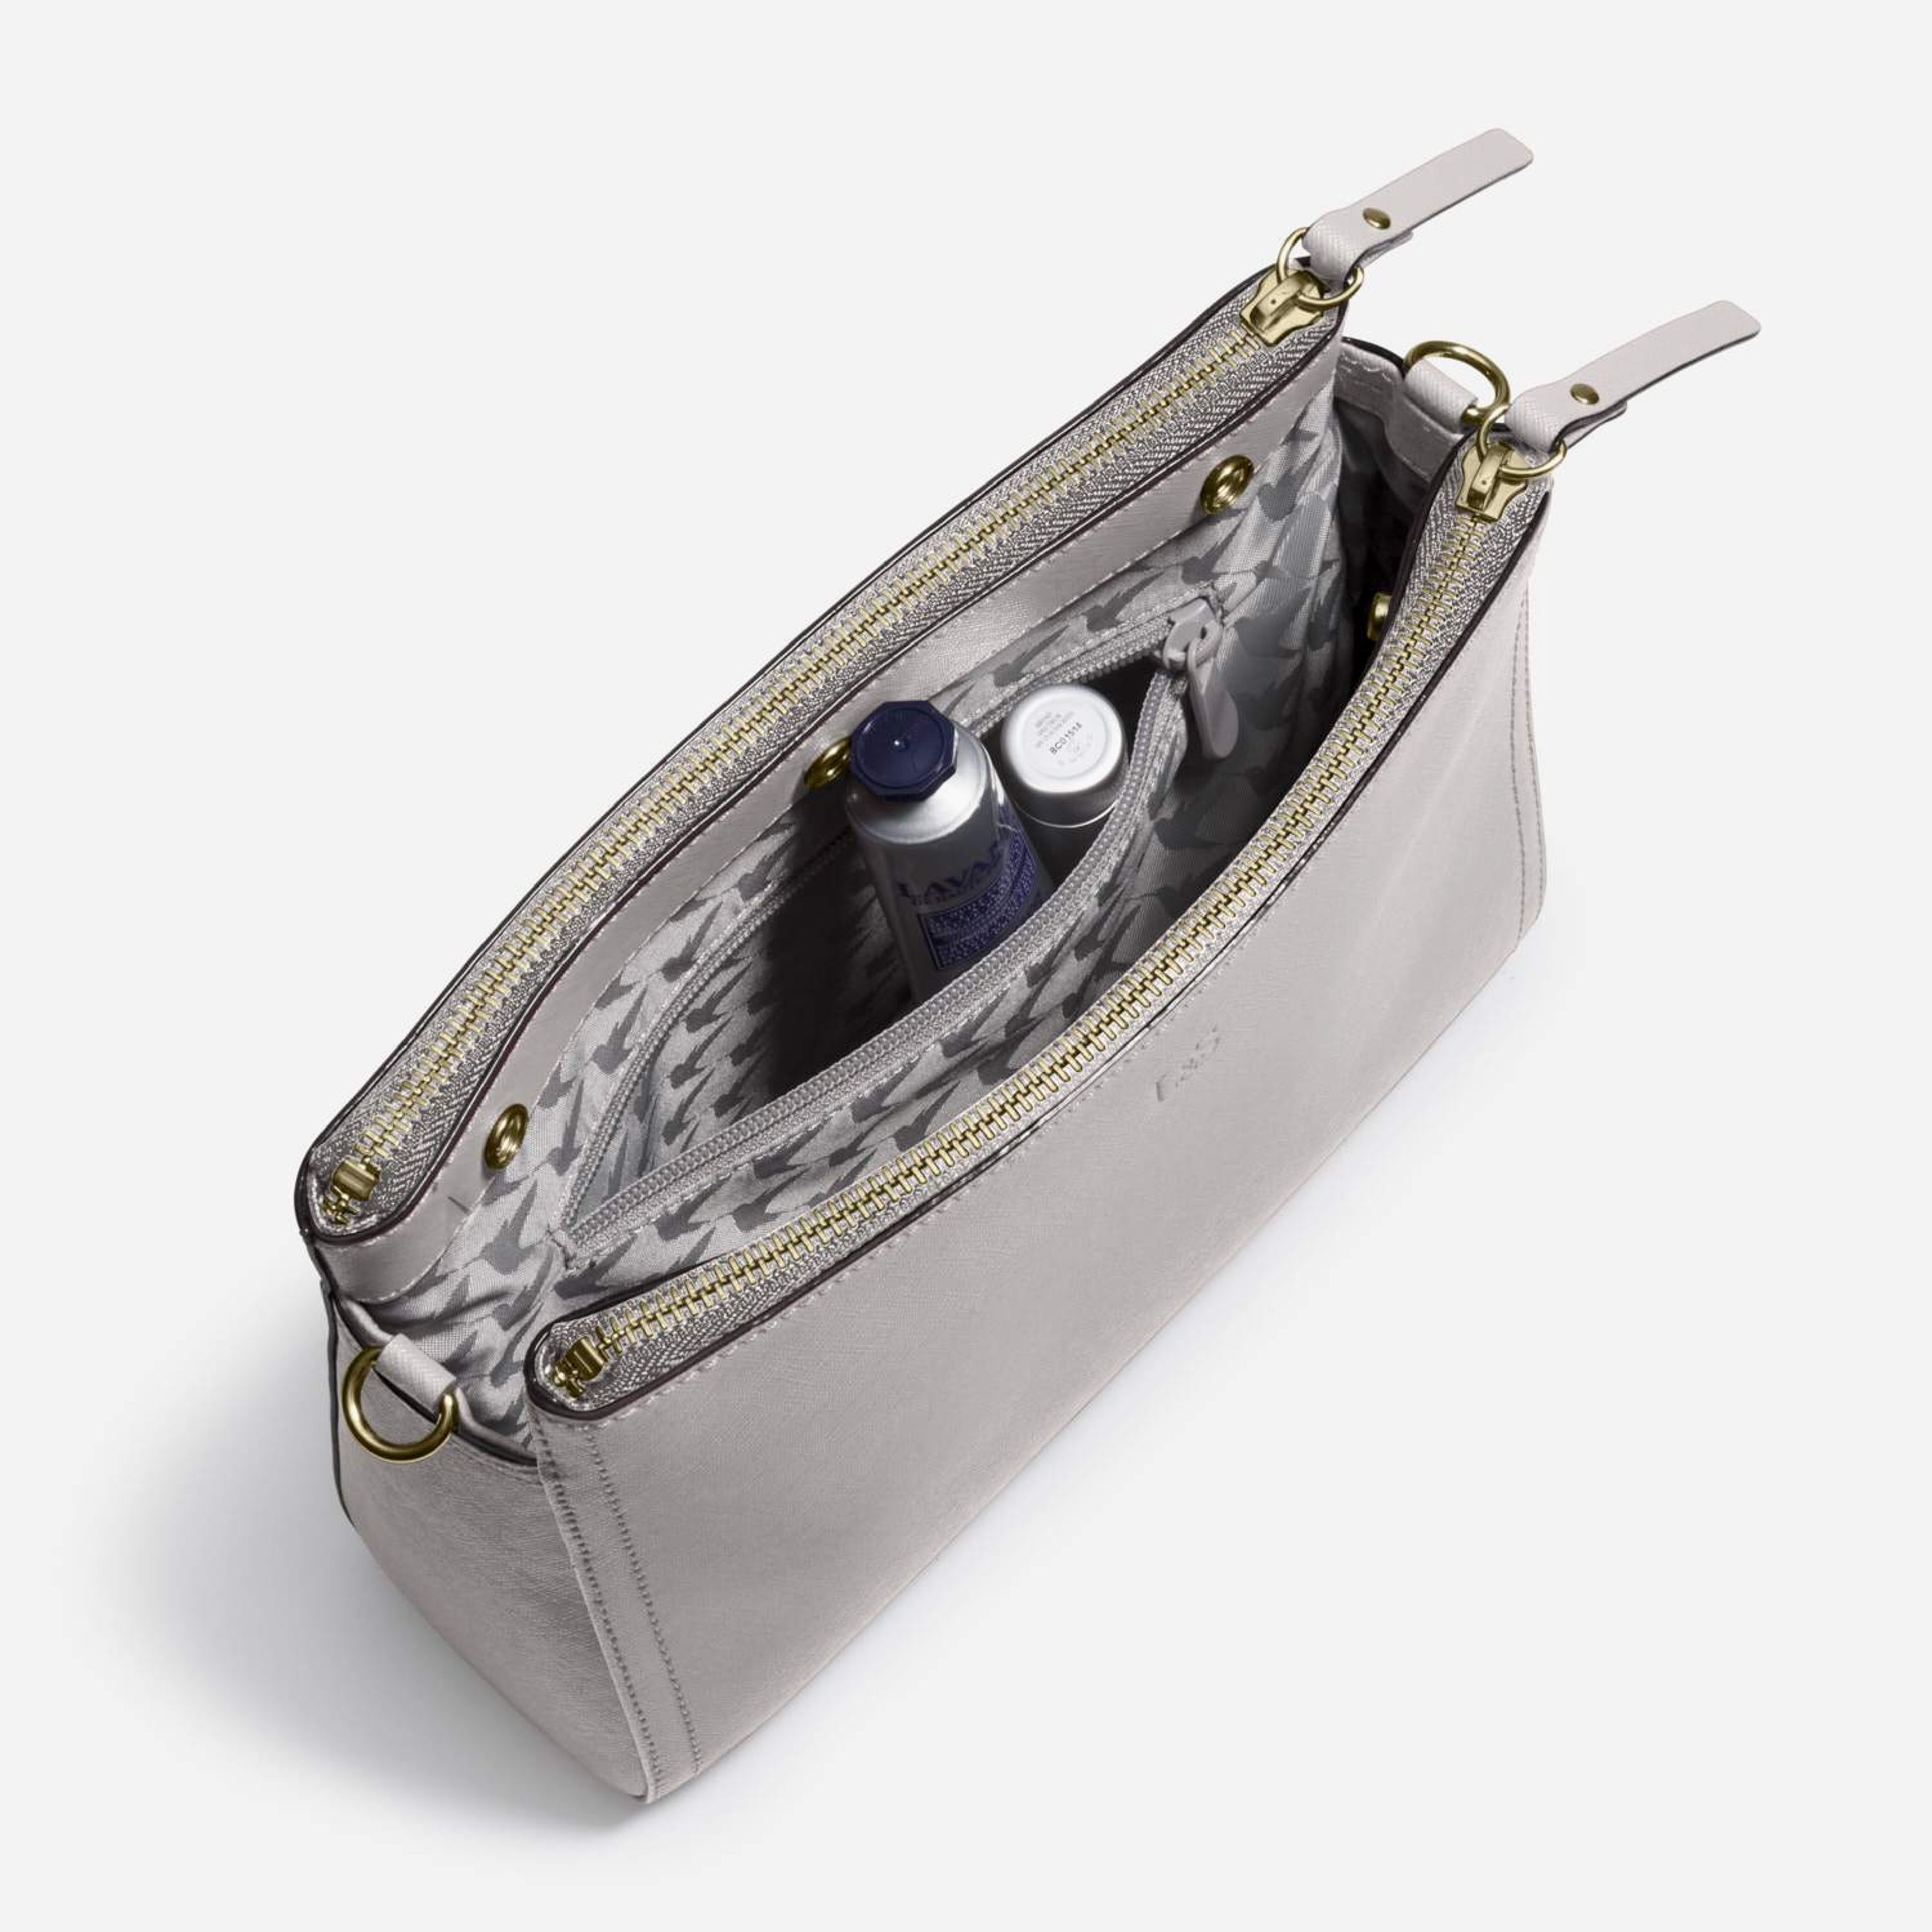 The Pearl - Saffiano Leather - Light Grey / Gold / Grey